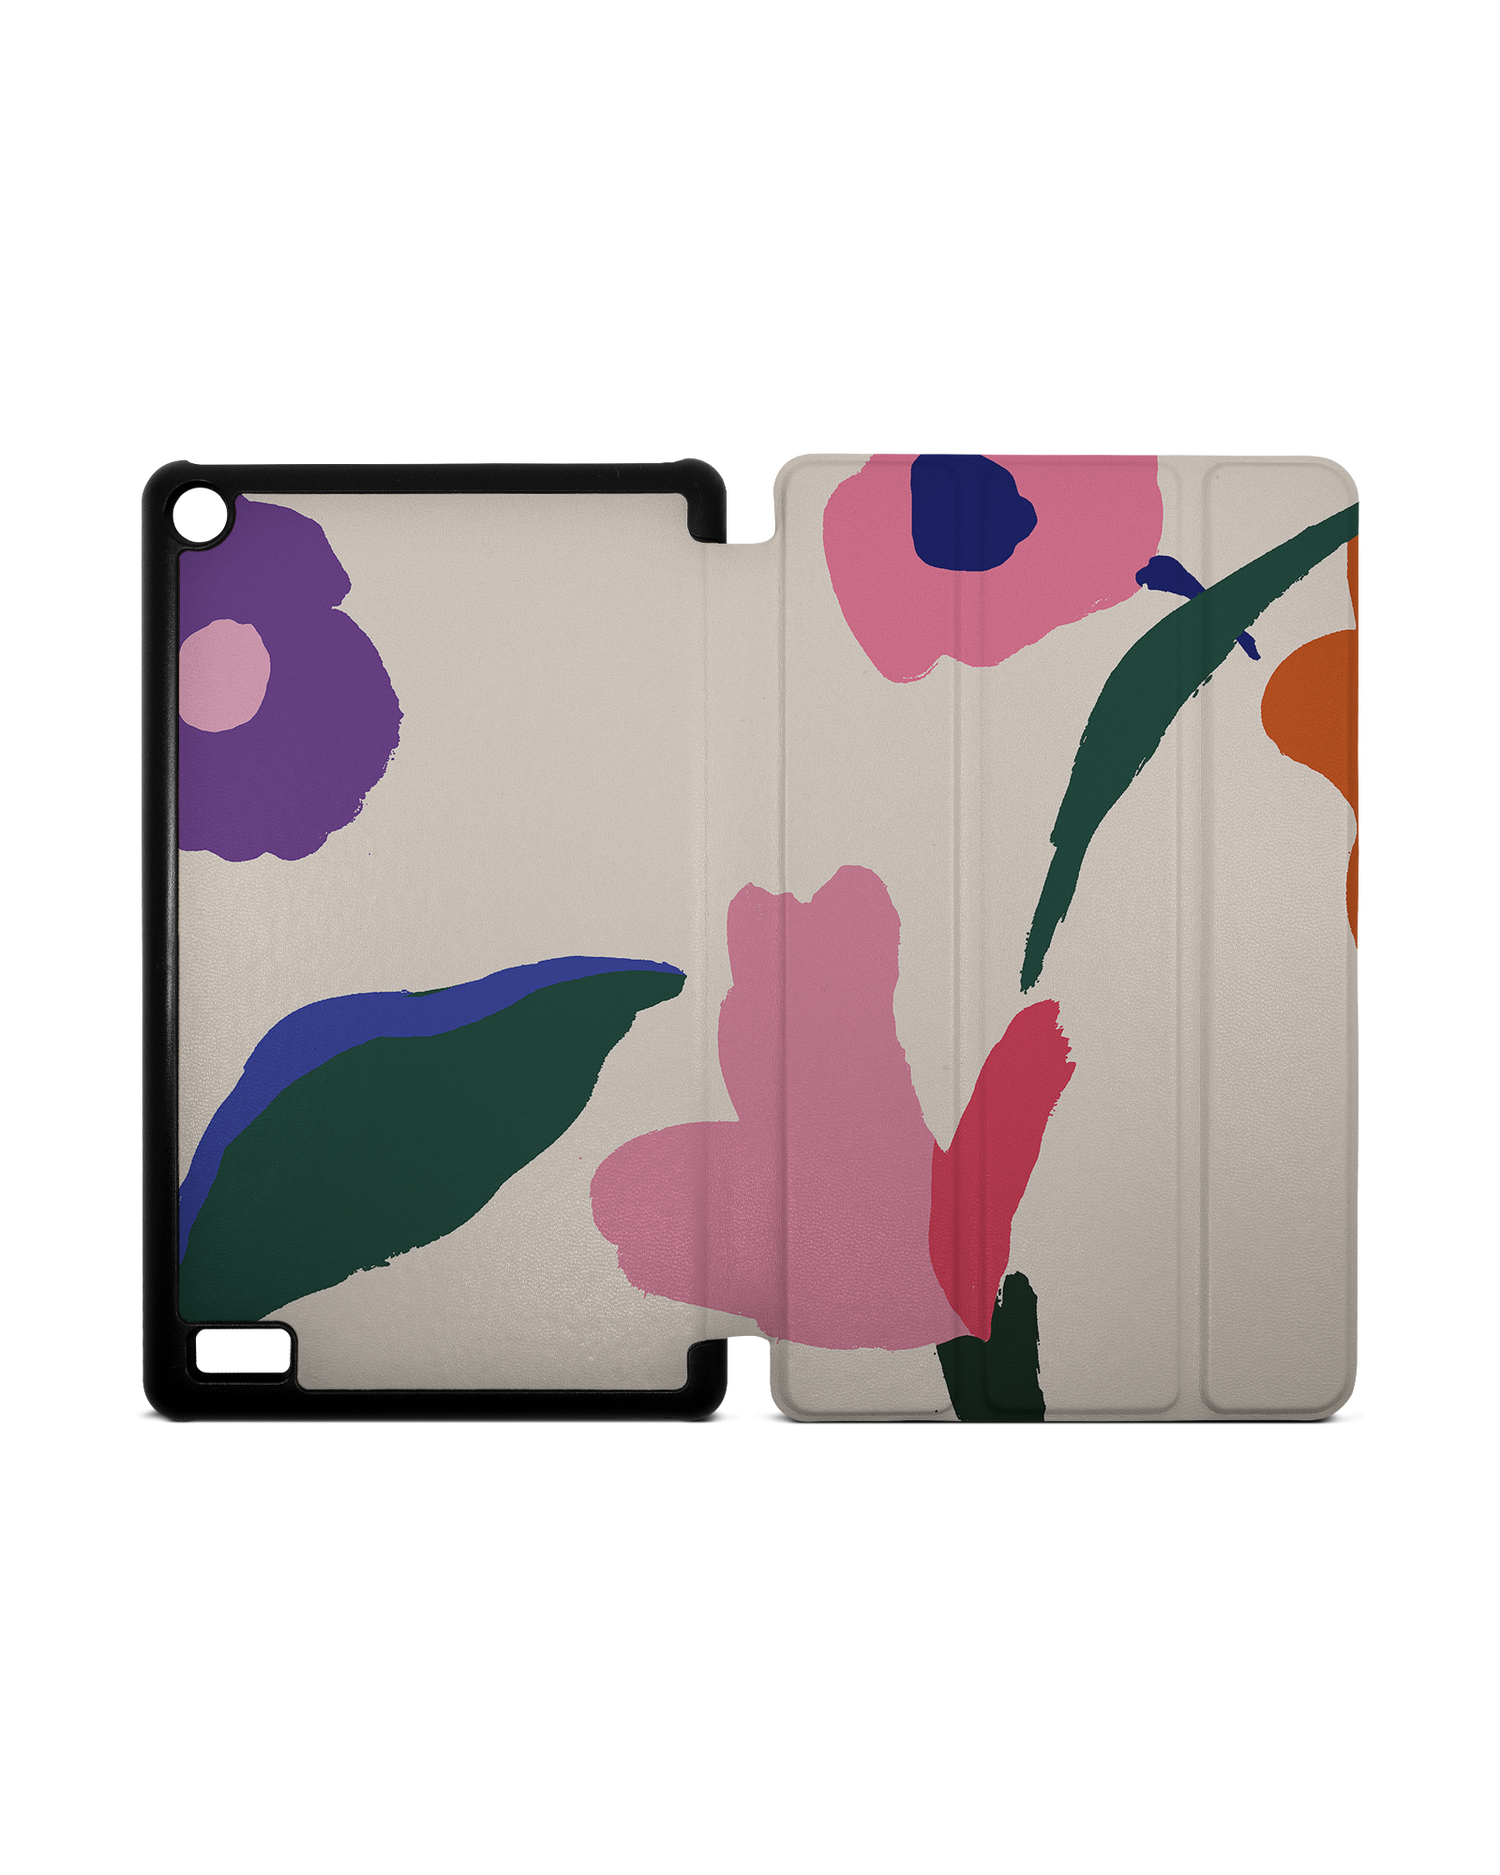 Handpainted Blooms Tablet Smart Case for Amazon Fire 7: Opened